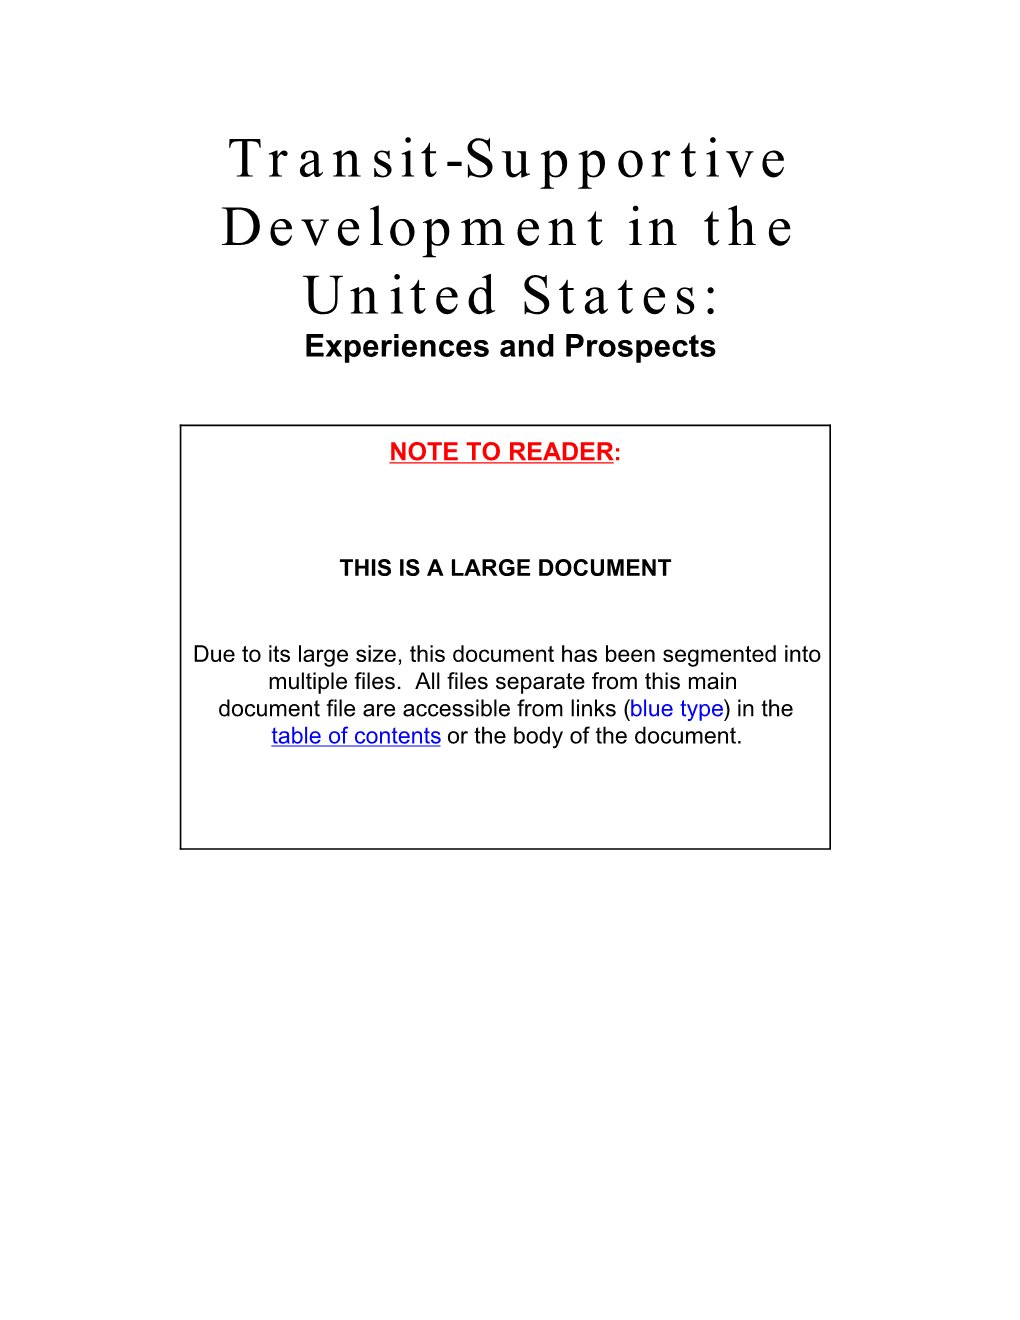 Transit-Supportive Development in the United States: Experiences and Prospects